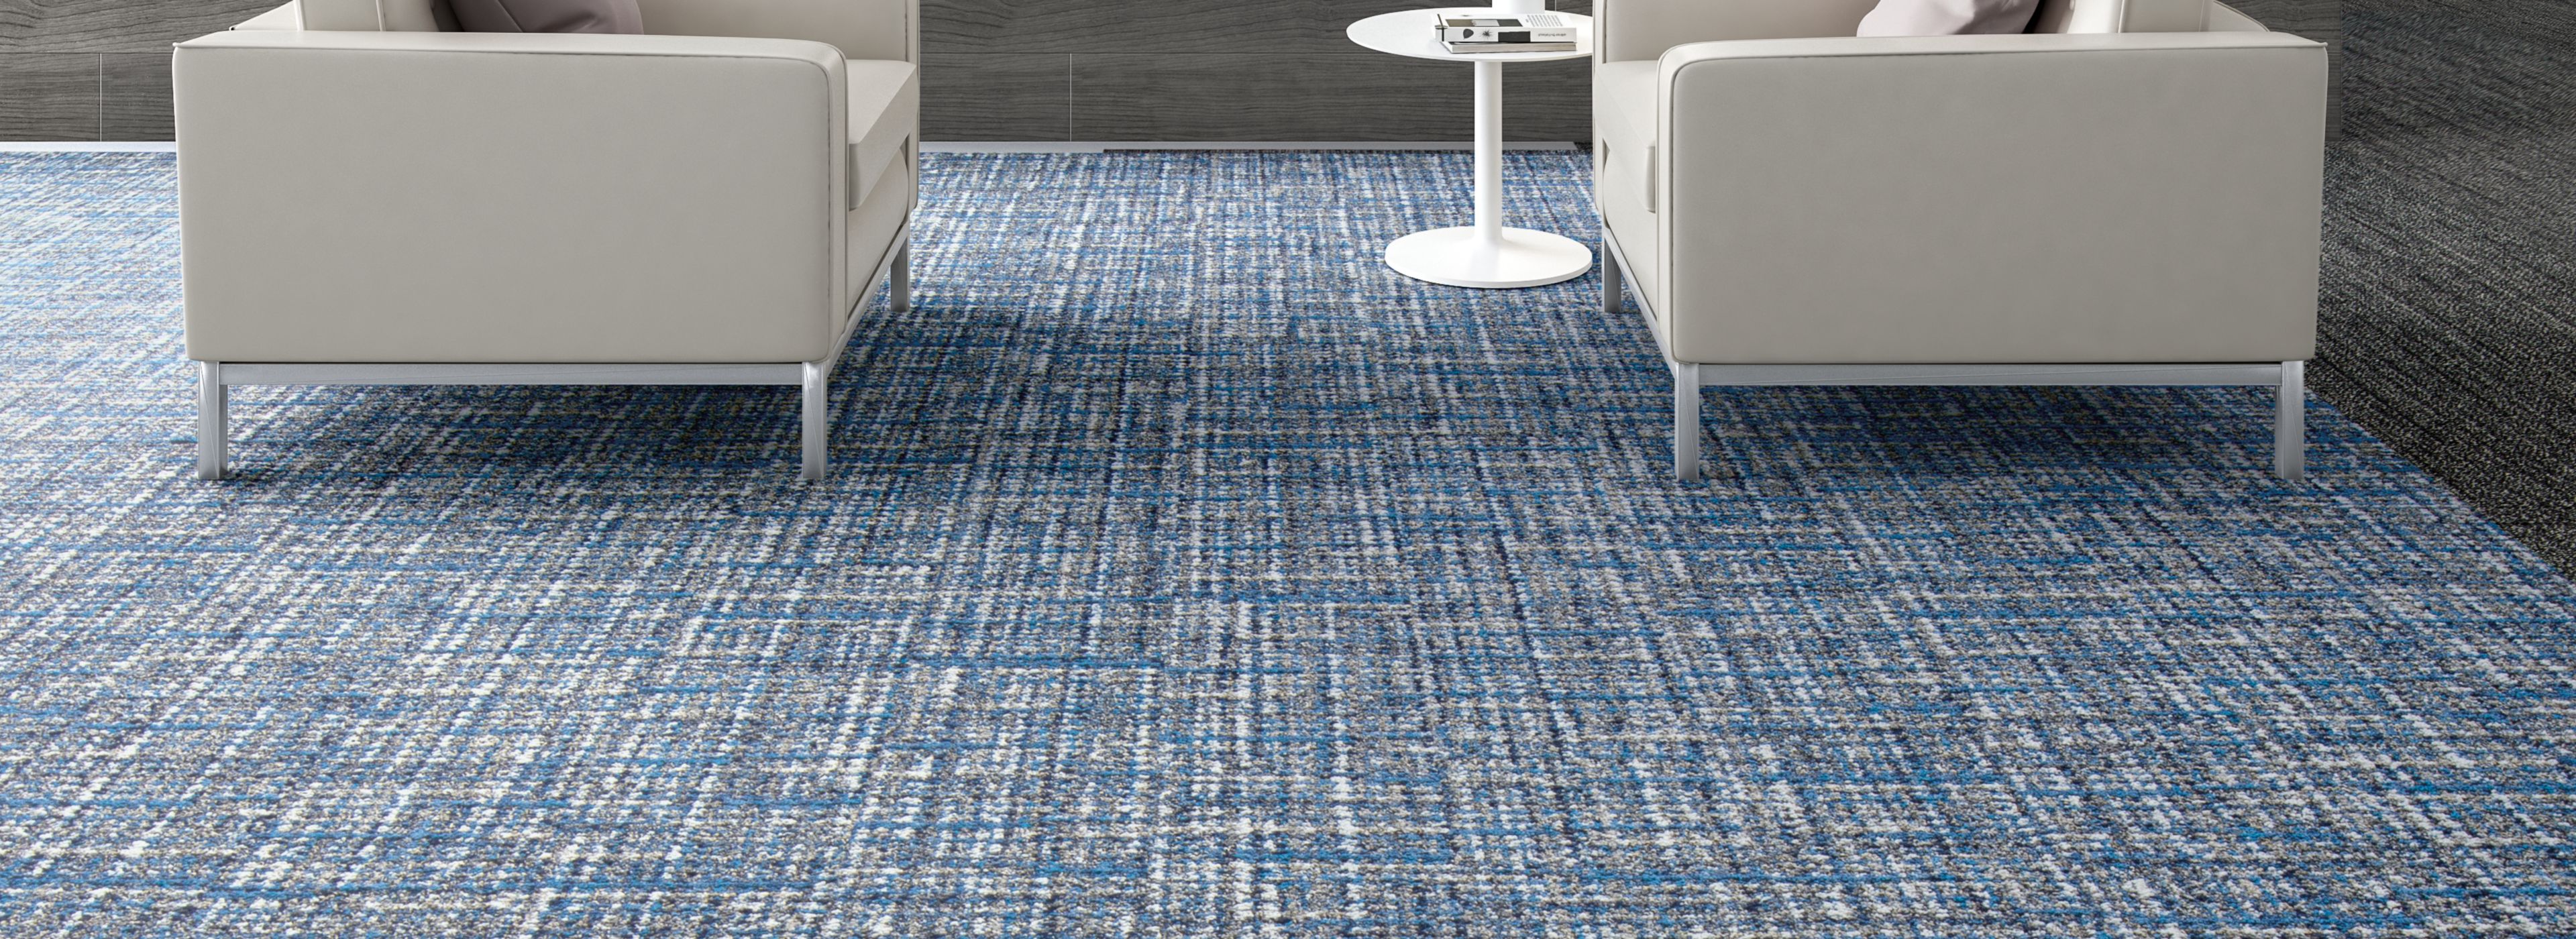 Interface WW895 plank carpet tile in lobby area with couches and side table  image number 1